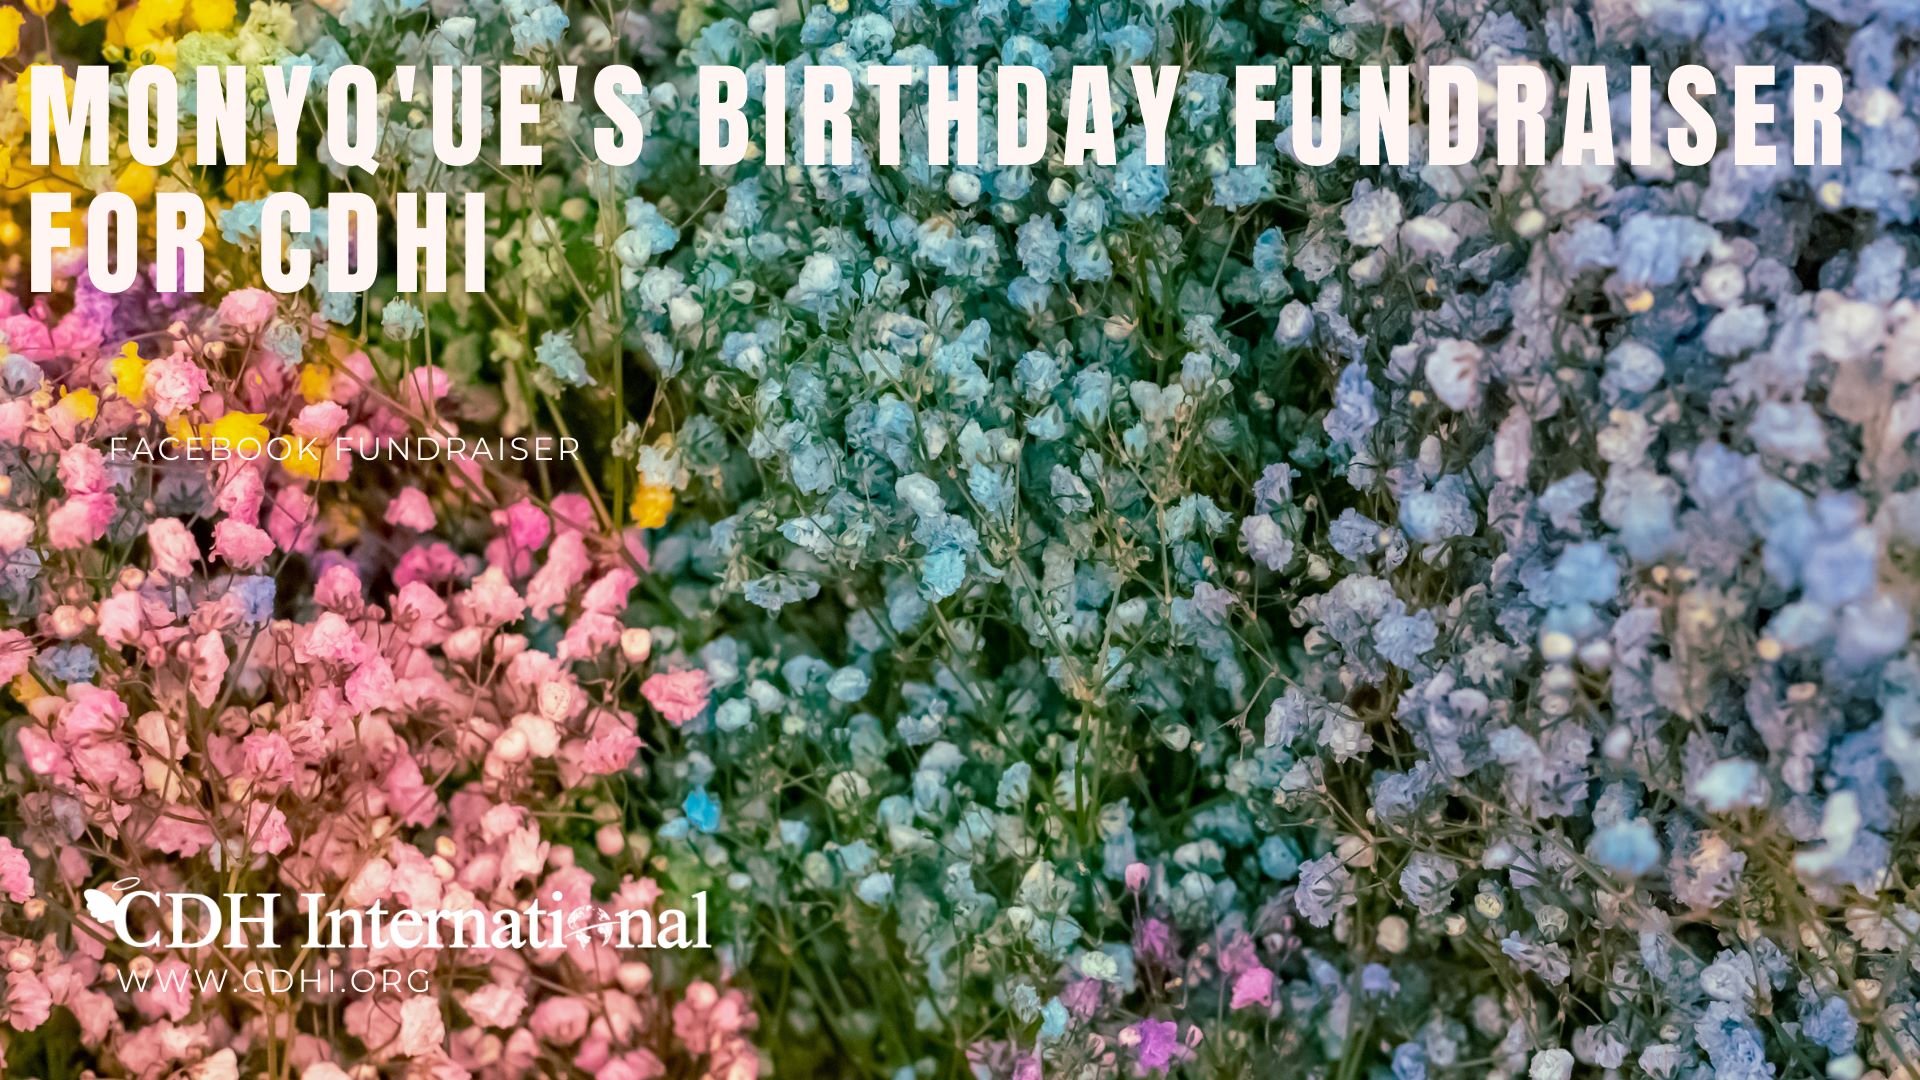 Shaquille’s Birthday Fundraiser for CDHi